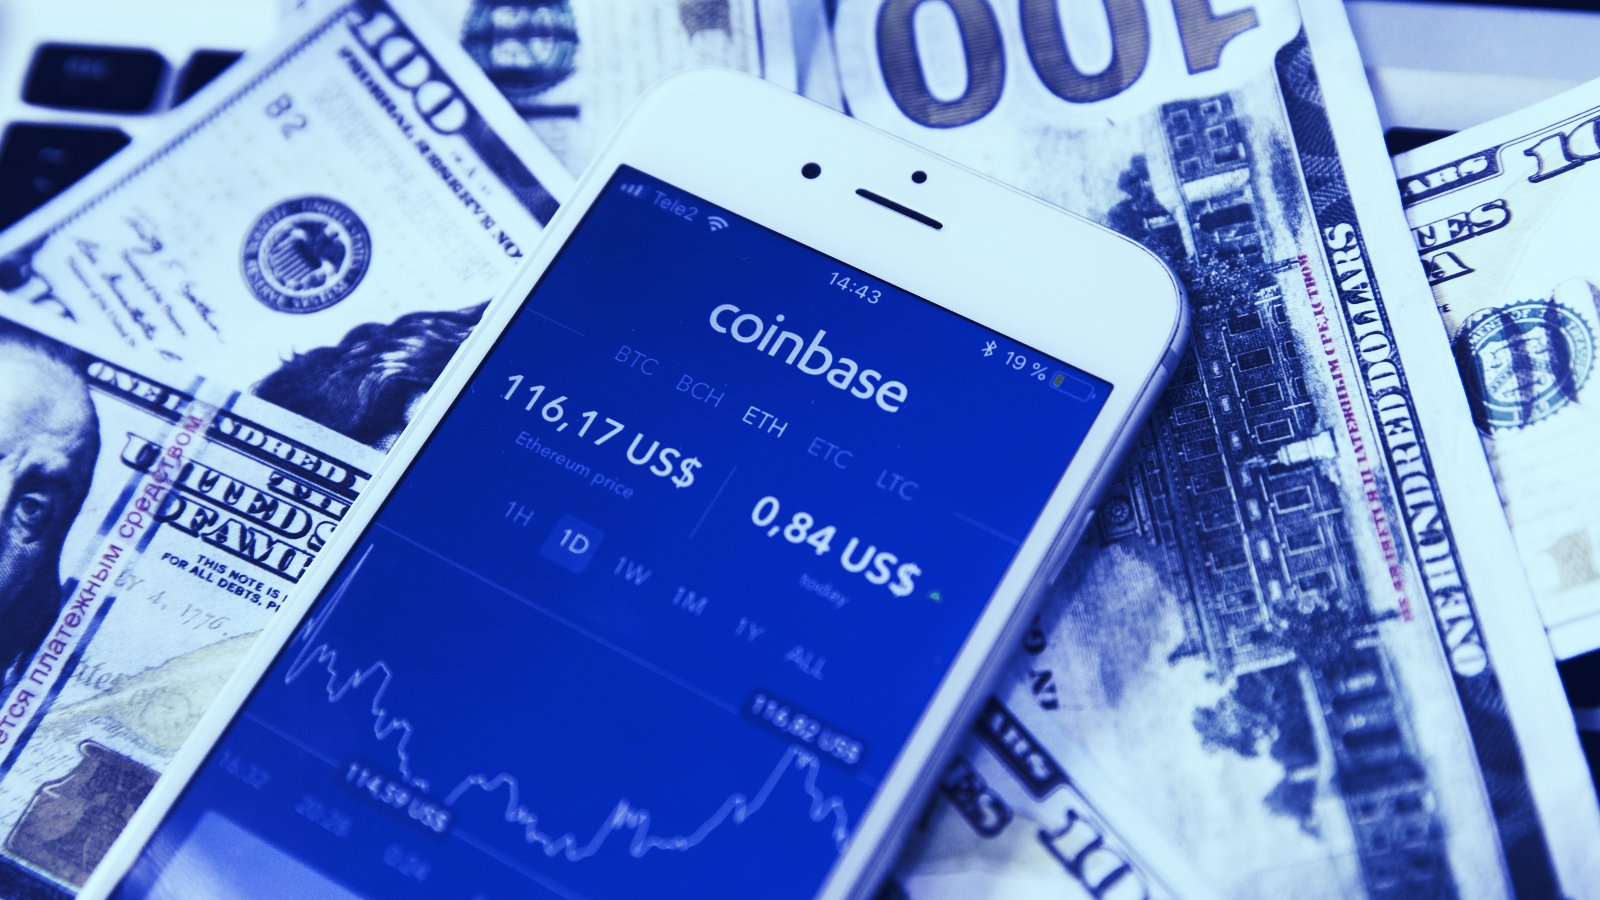 Coinbase Made 'False and Misleading Statements' About its Operations Lawsuits Allege